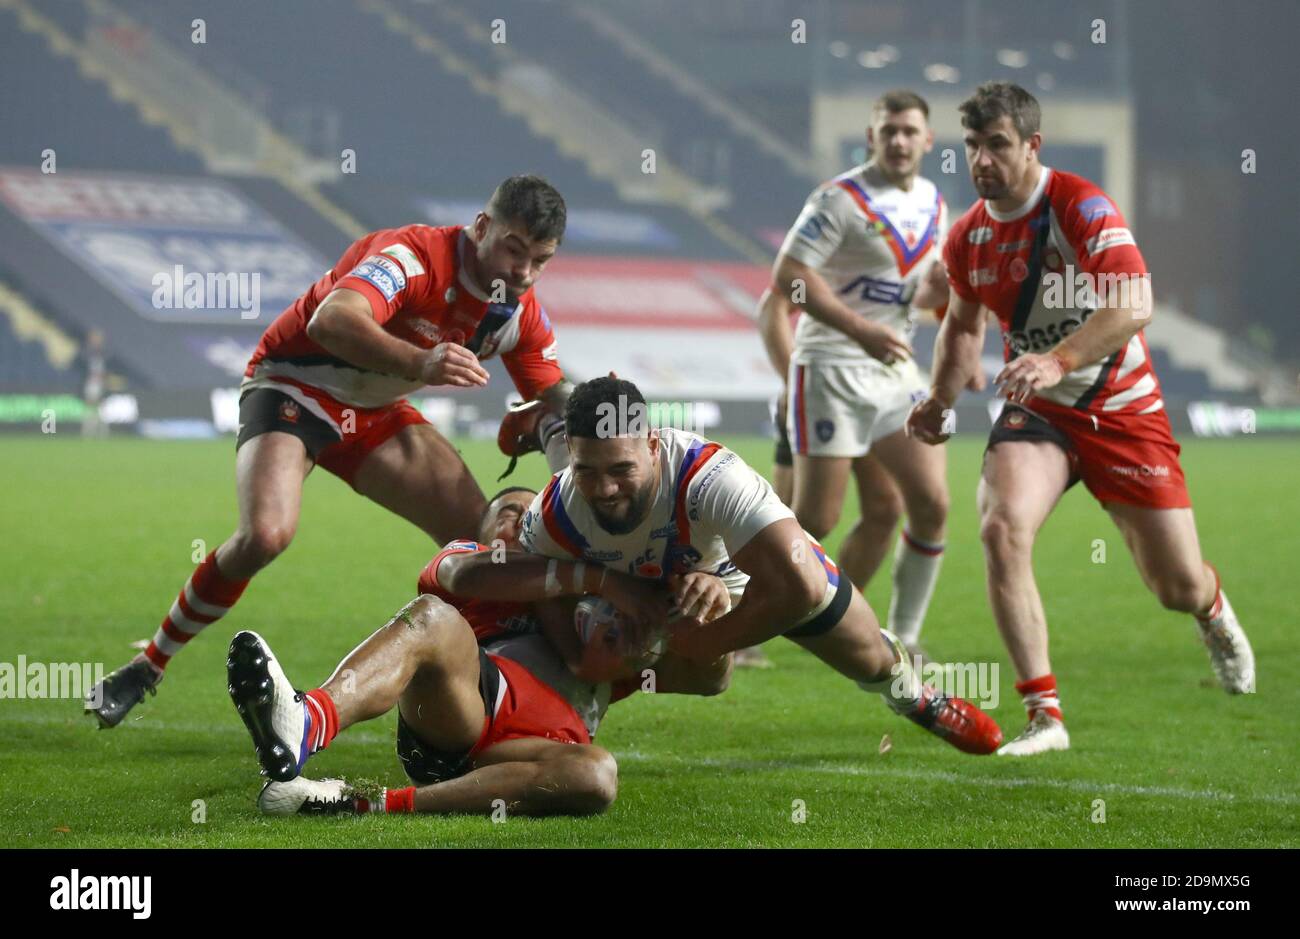 Wakefield Trinity's Kelepi Tanginoa dives in to score a try during the Betfred Super League match at the Emerald Headingley Stadium, Leeds. Stock Photo